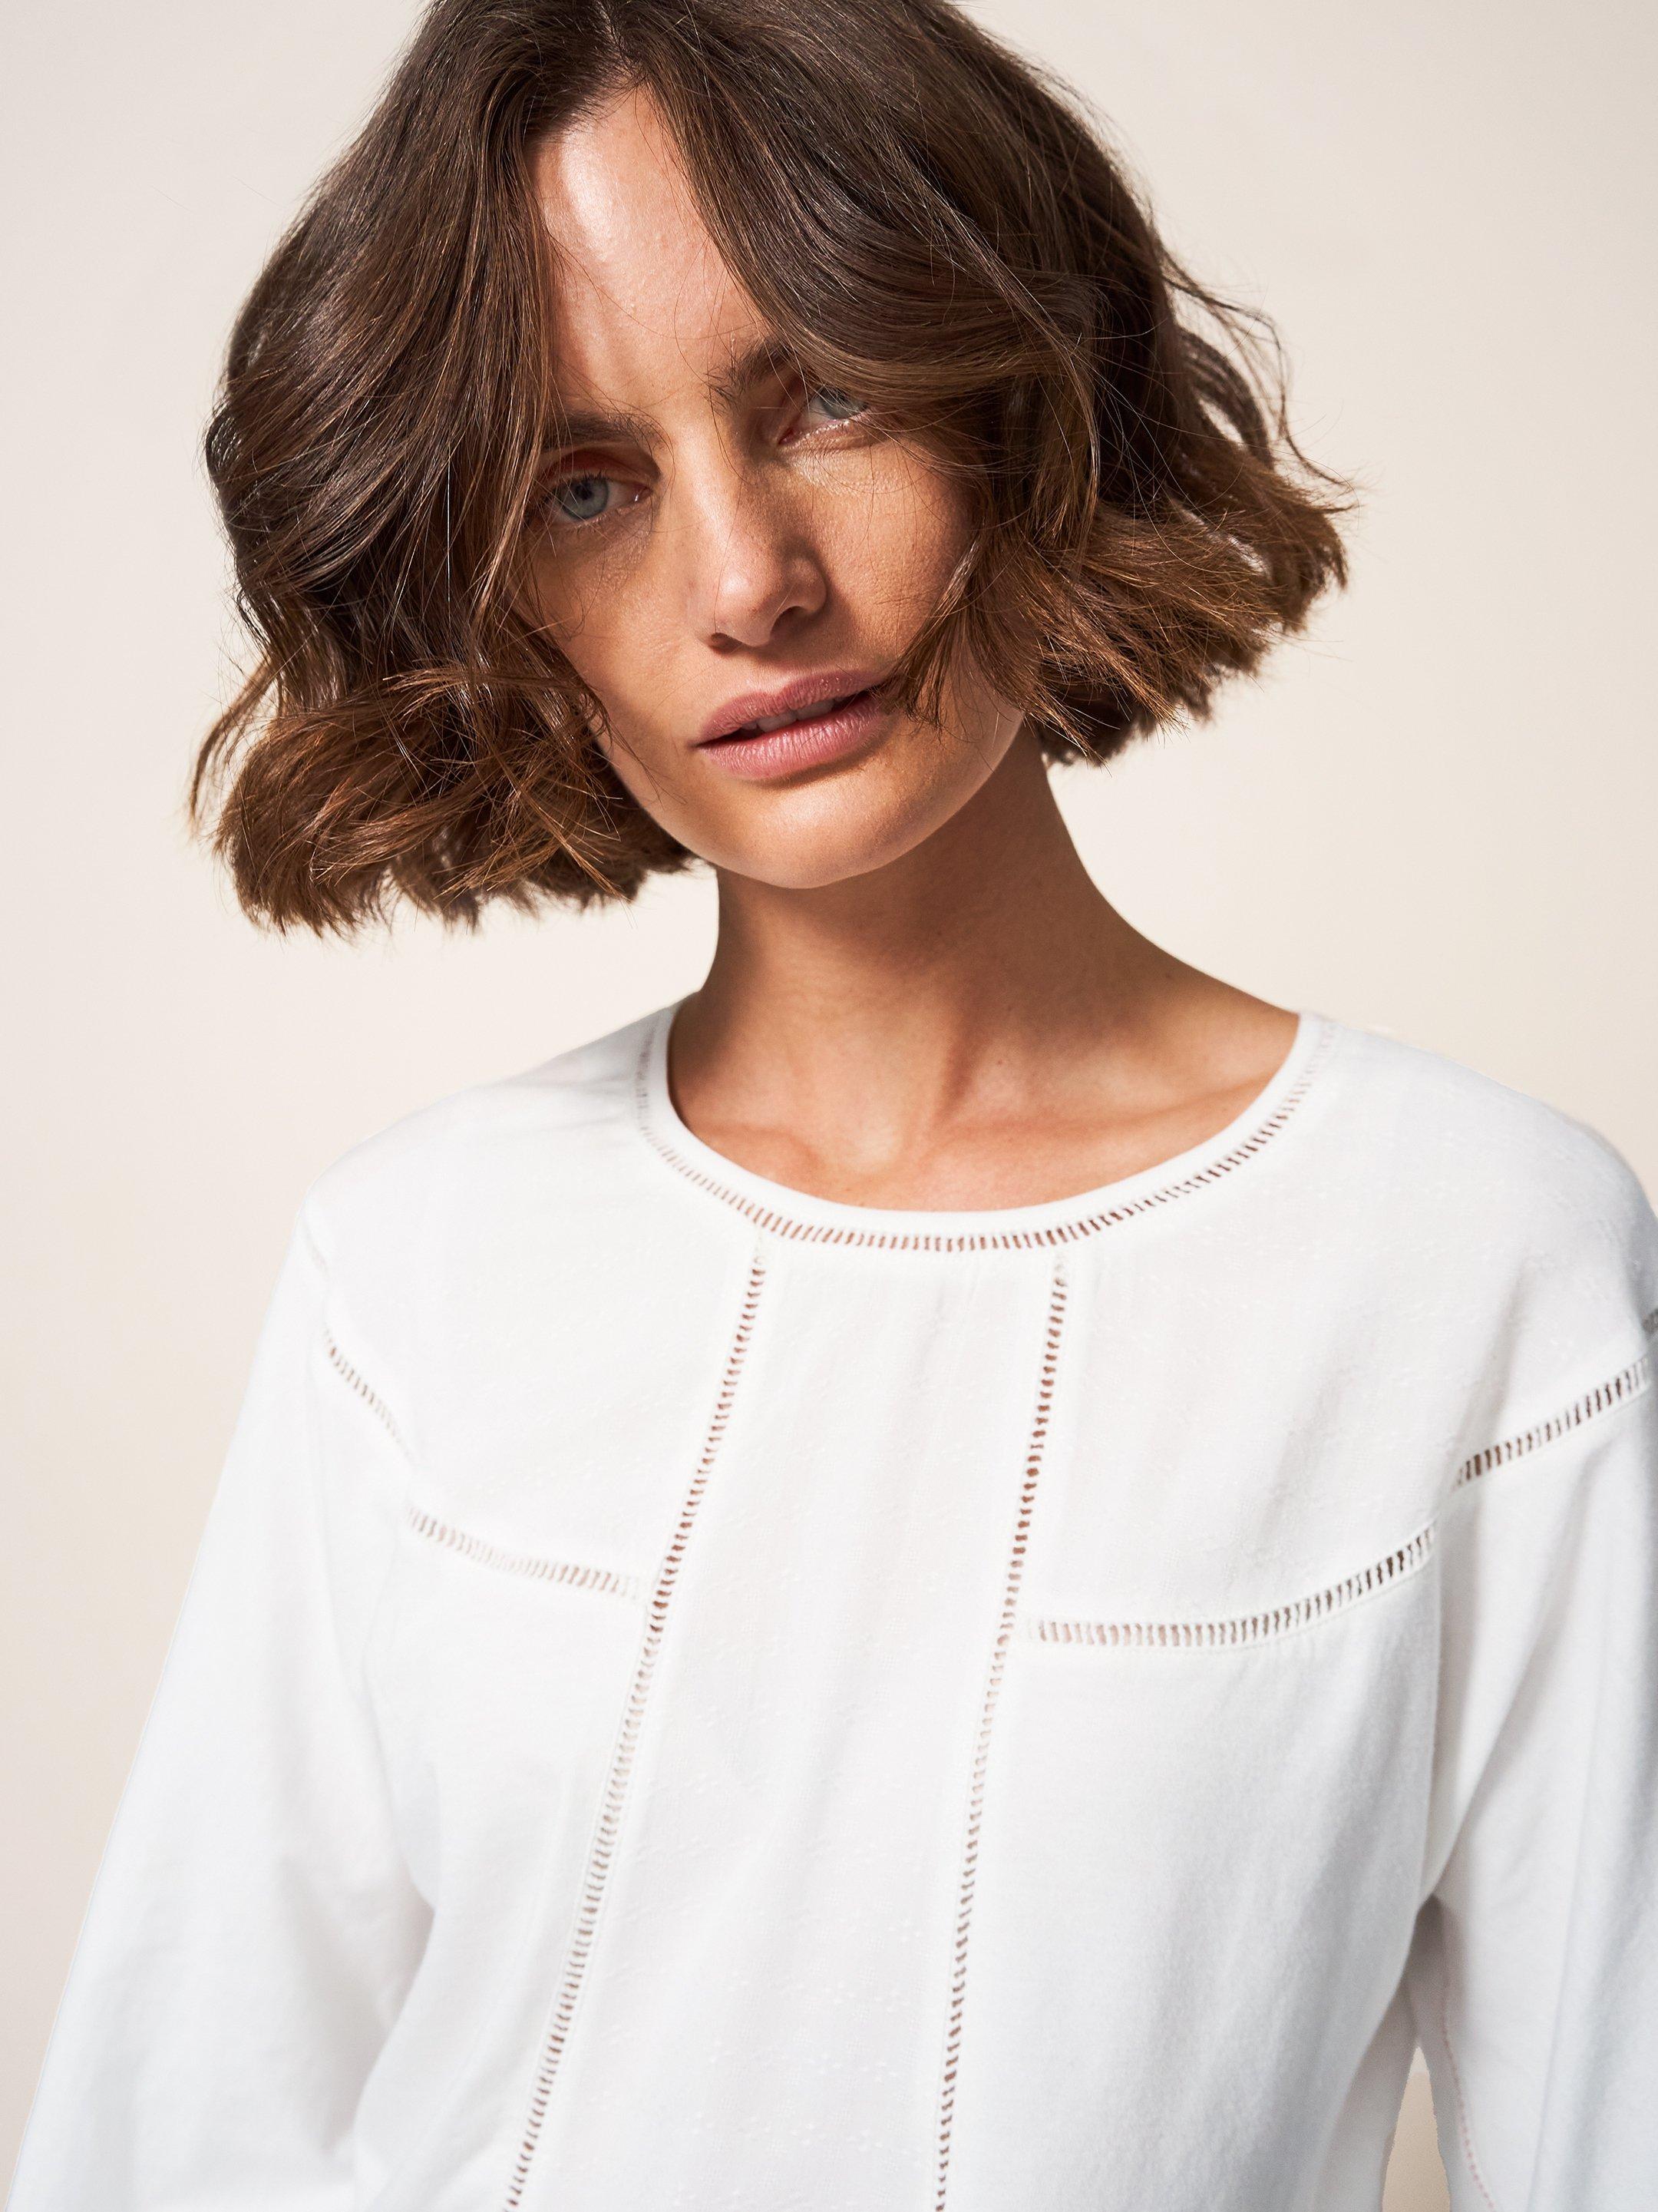 MOLLIE JERSEY MIX TOP in BRIL WHITE - MODEL DETAIL